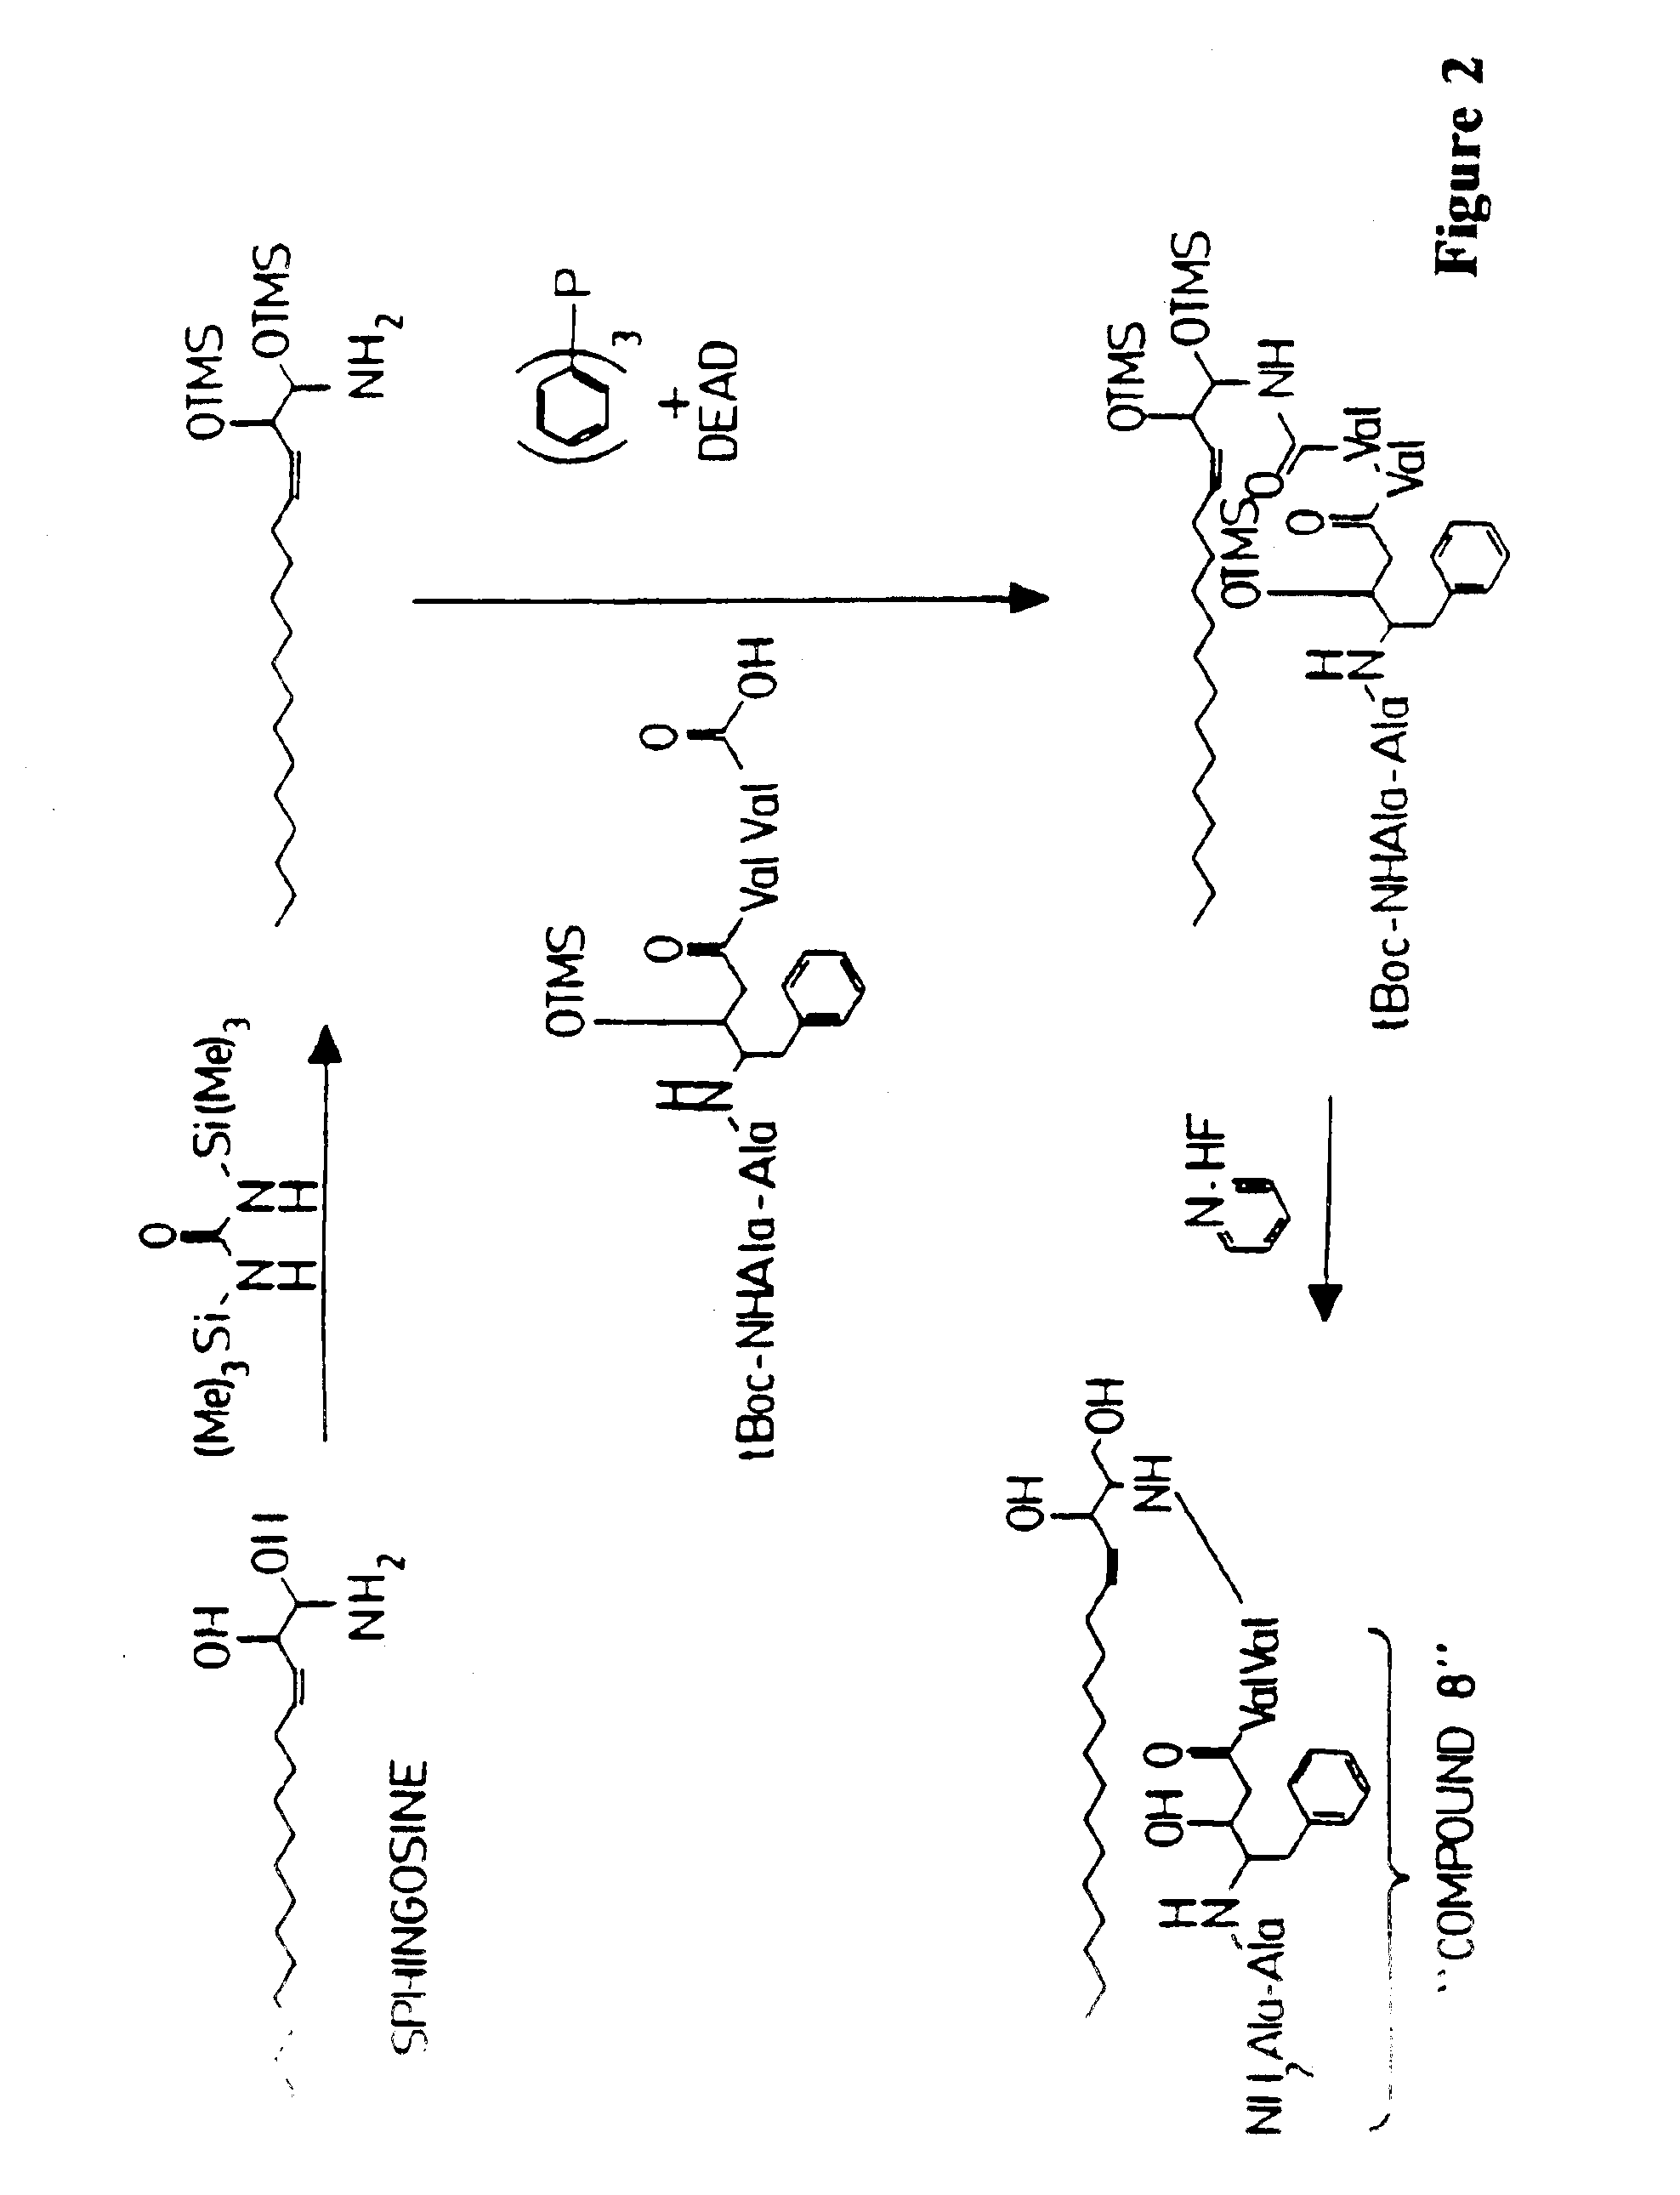 Composition containing porous microparticle impregnated with biologically-active compound for treatment of infection